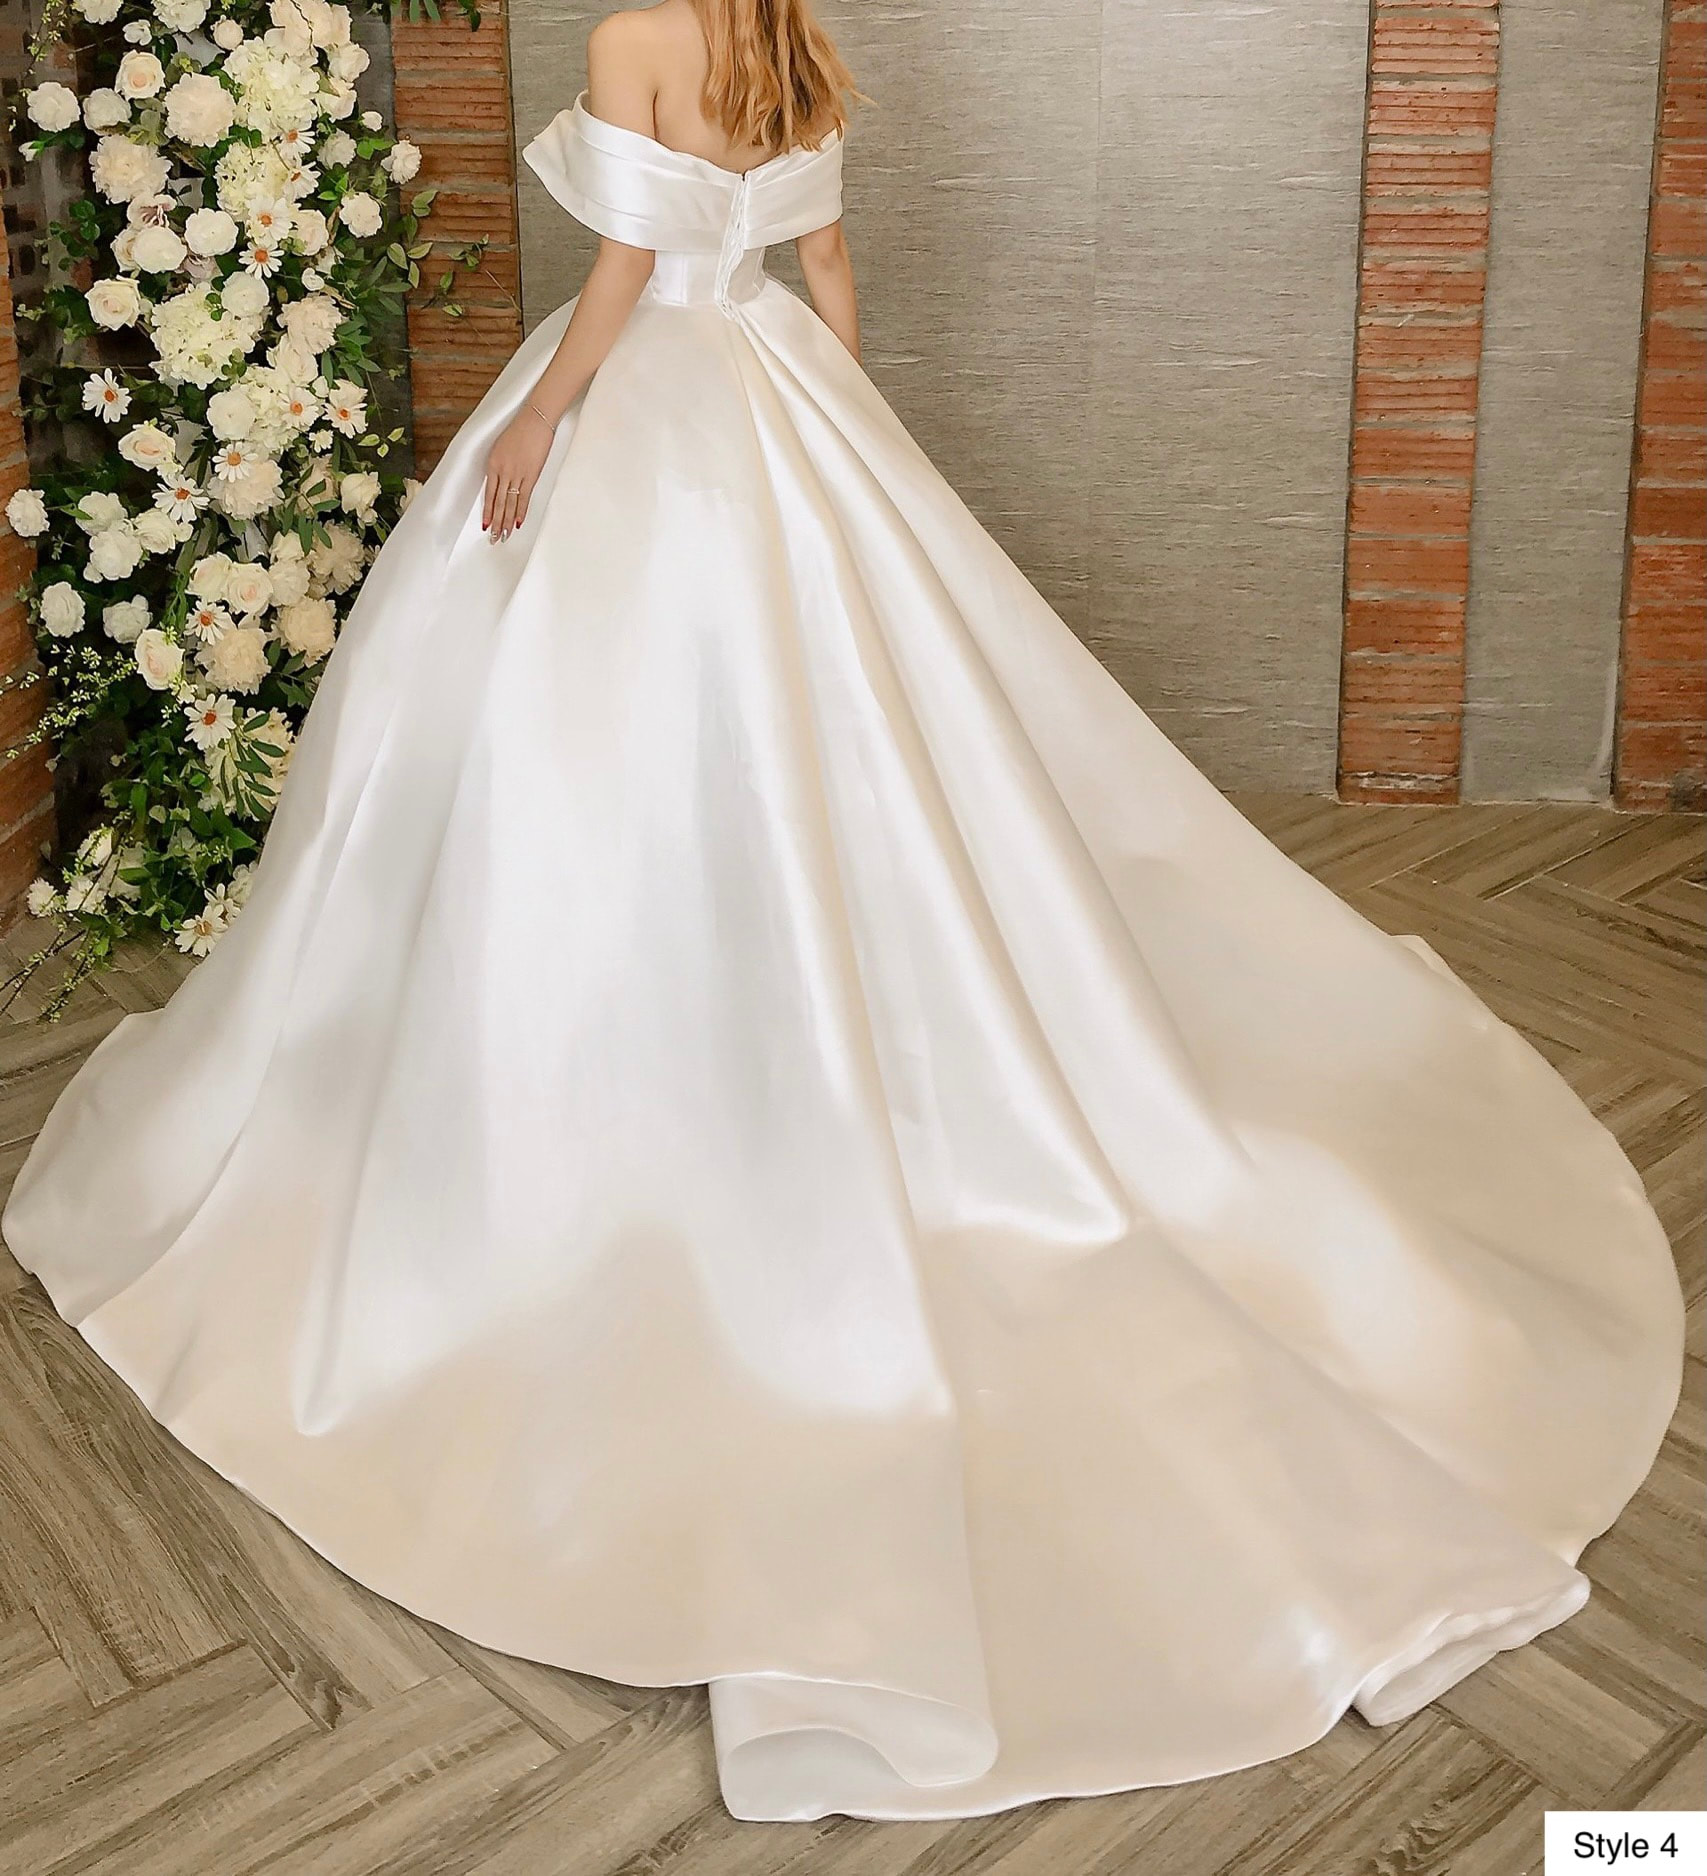 Off The Shoulder Elegant White Satin Ball Gown Wedding Dress With Train Various Styles